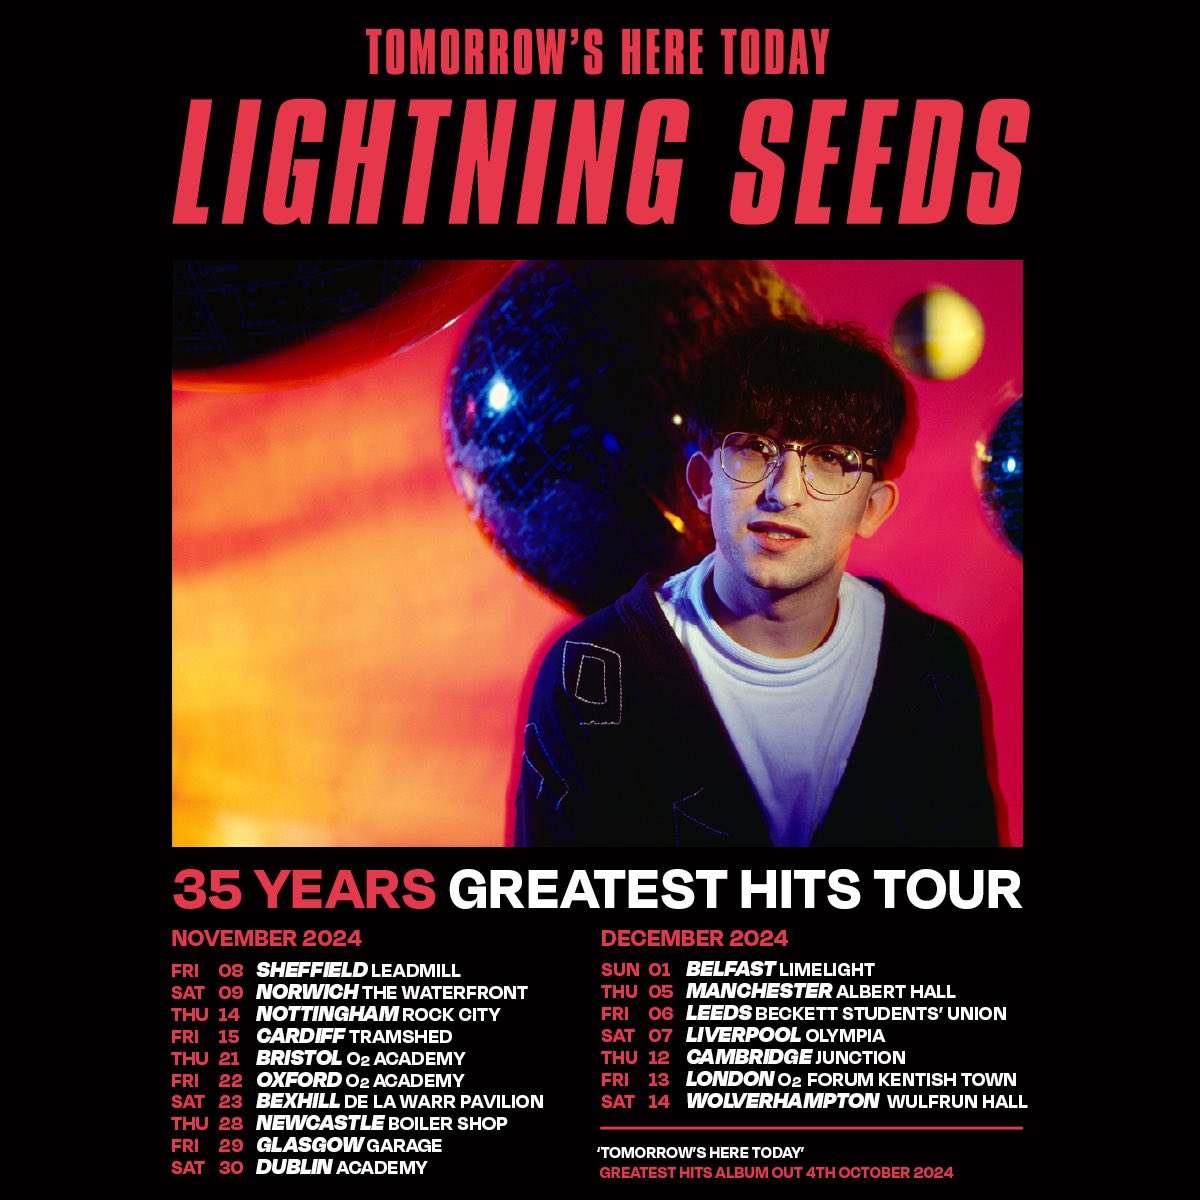 We are delighted to announce ‘Tomorrow’s Here Today’, a Greatest Hits Tour and Album celebrating 35 years of Lightning Seeds. Pre order any format of the album from our official store before 3pm on Tuesday for early access to our 2024 UK and Ireland Tour LightningSeeds.lnk.to/StoreAW